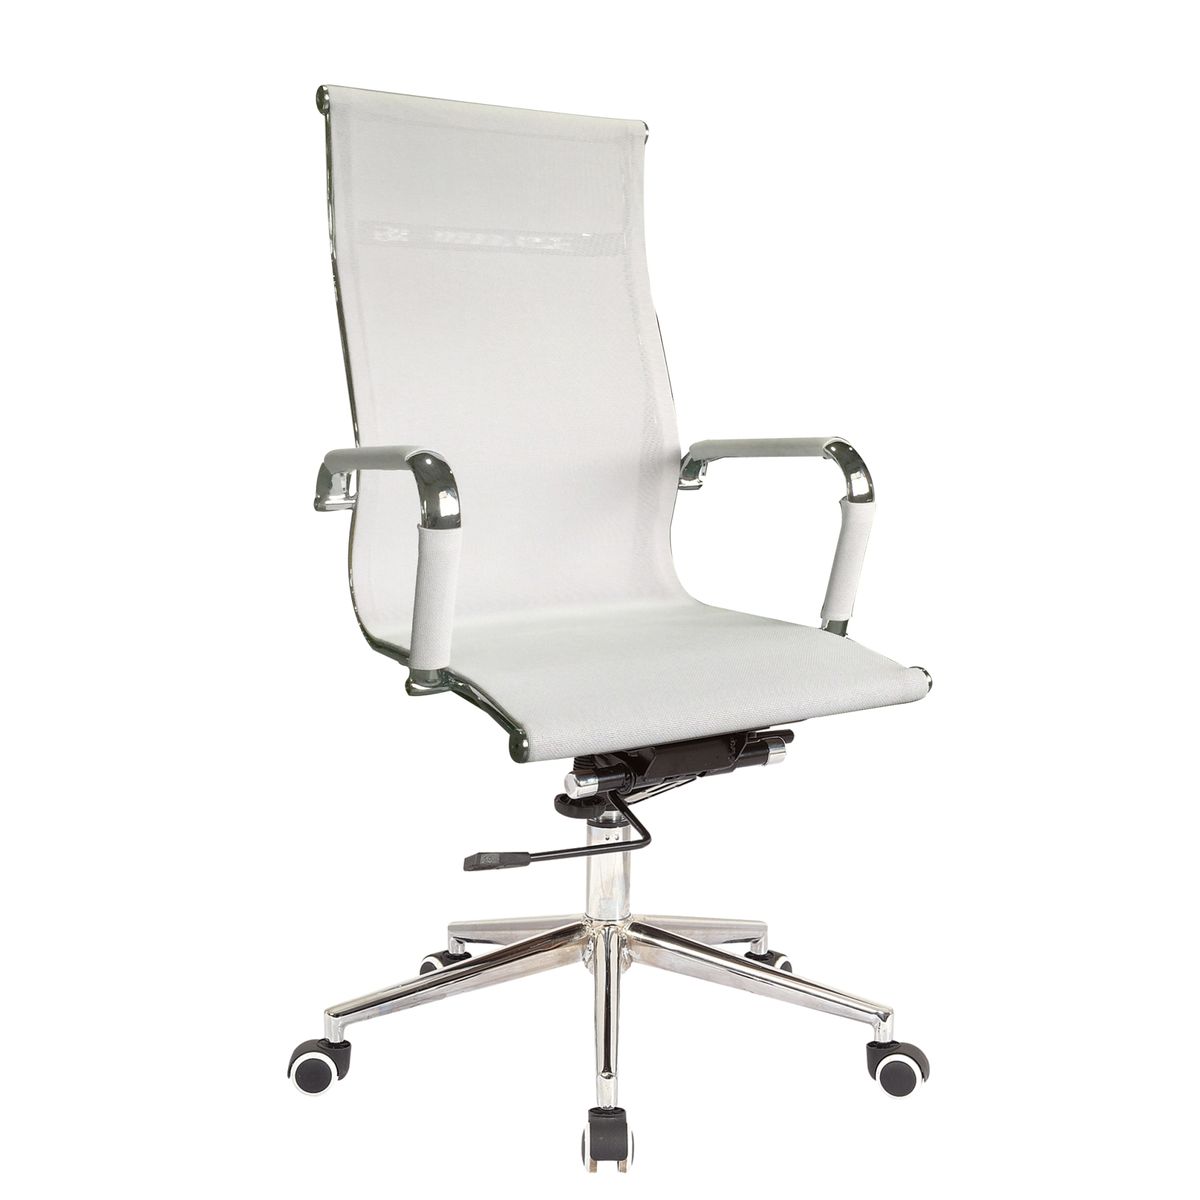 Netting High Back Office Chair-White | Shop Today. Get it Tomorrow ...